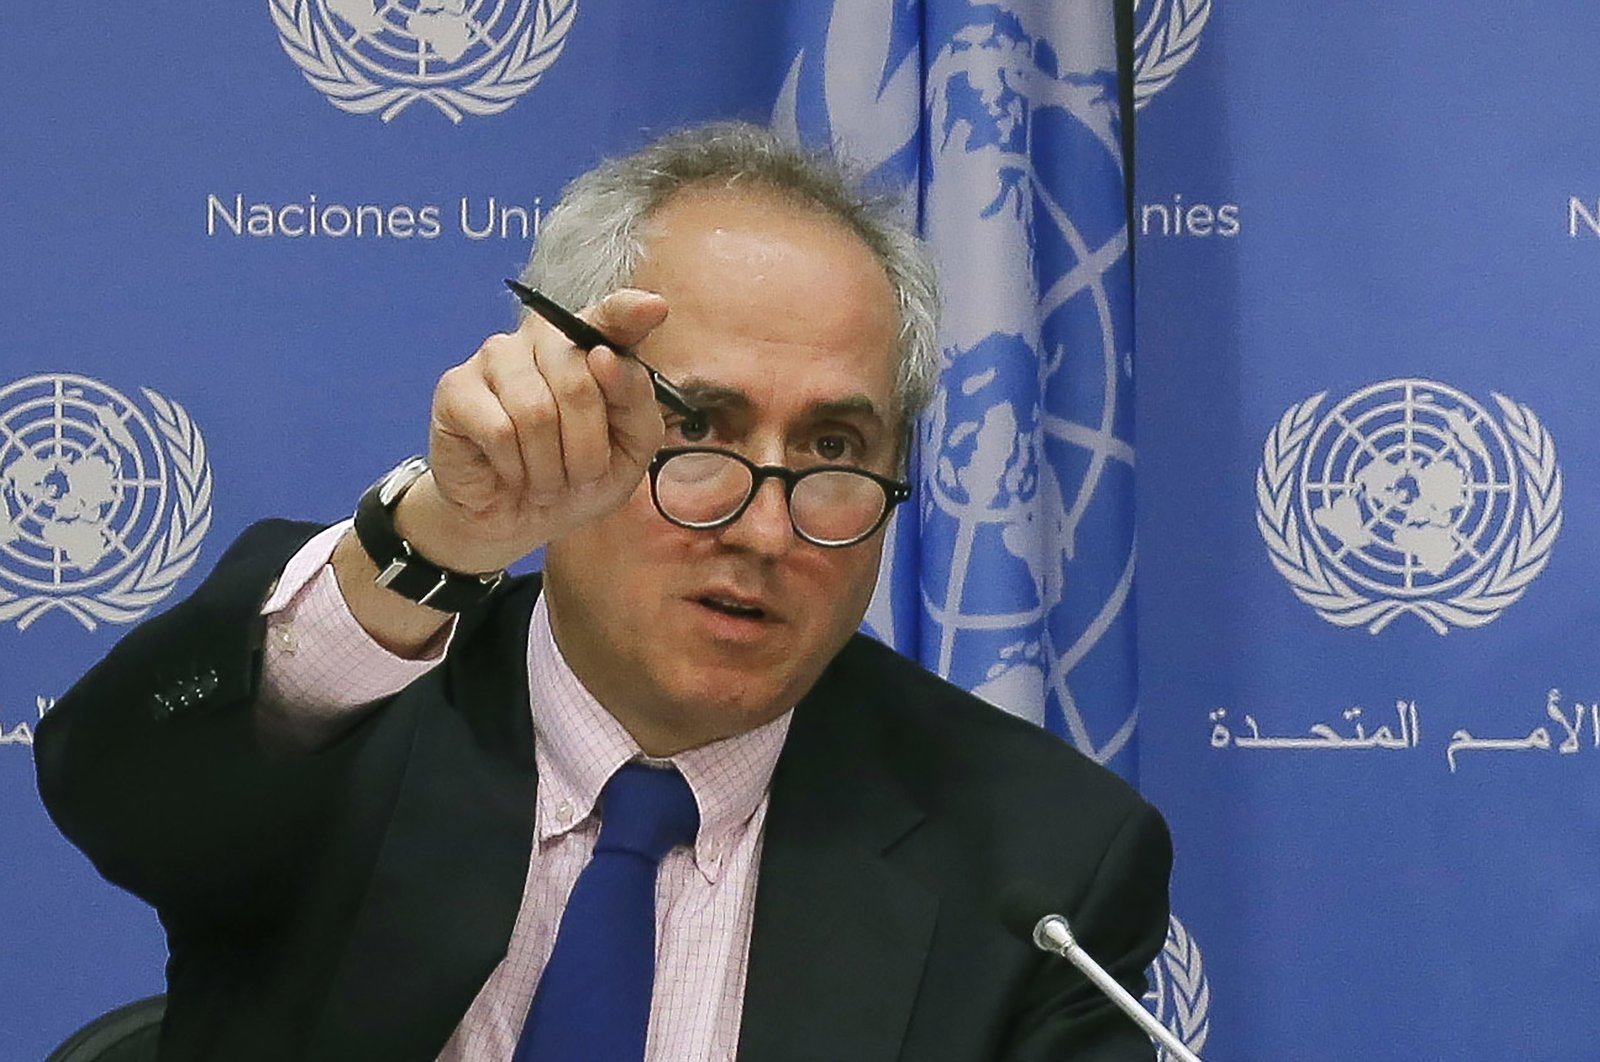 United Nations spokesperson Stephane Dujarric fields questions for U.N. Secretary-General Antonio Guterres during his first press conference with U.N. correspondents at U.N. headquarters, New York, U.S., June 20, 2017. (AP File Photo)